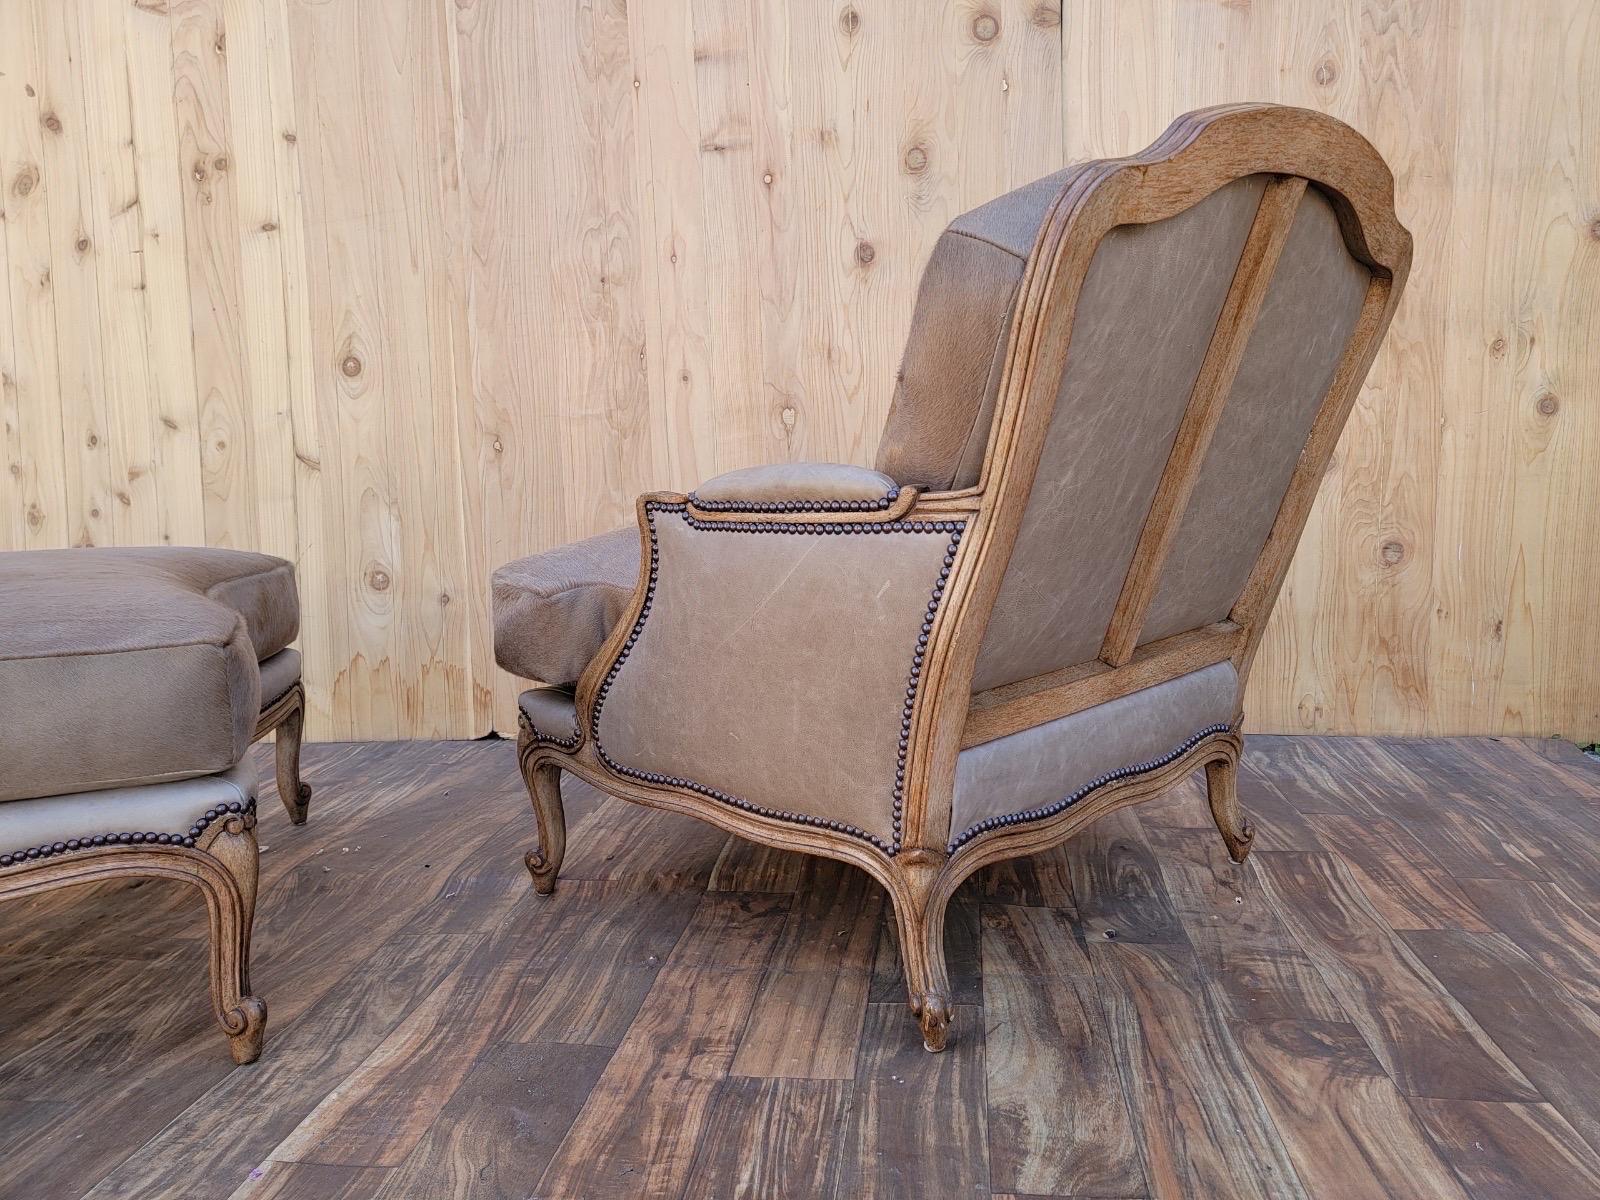 bergere chair with ottoman